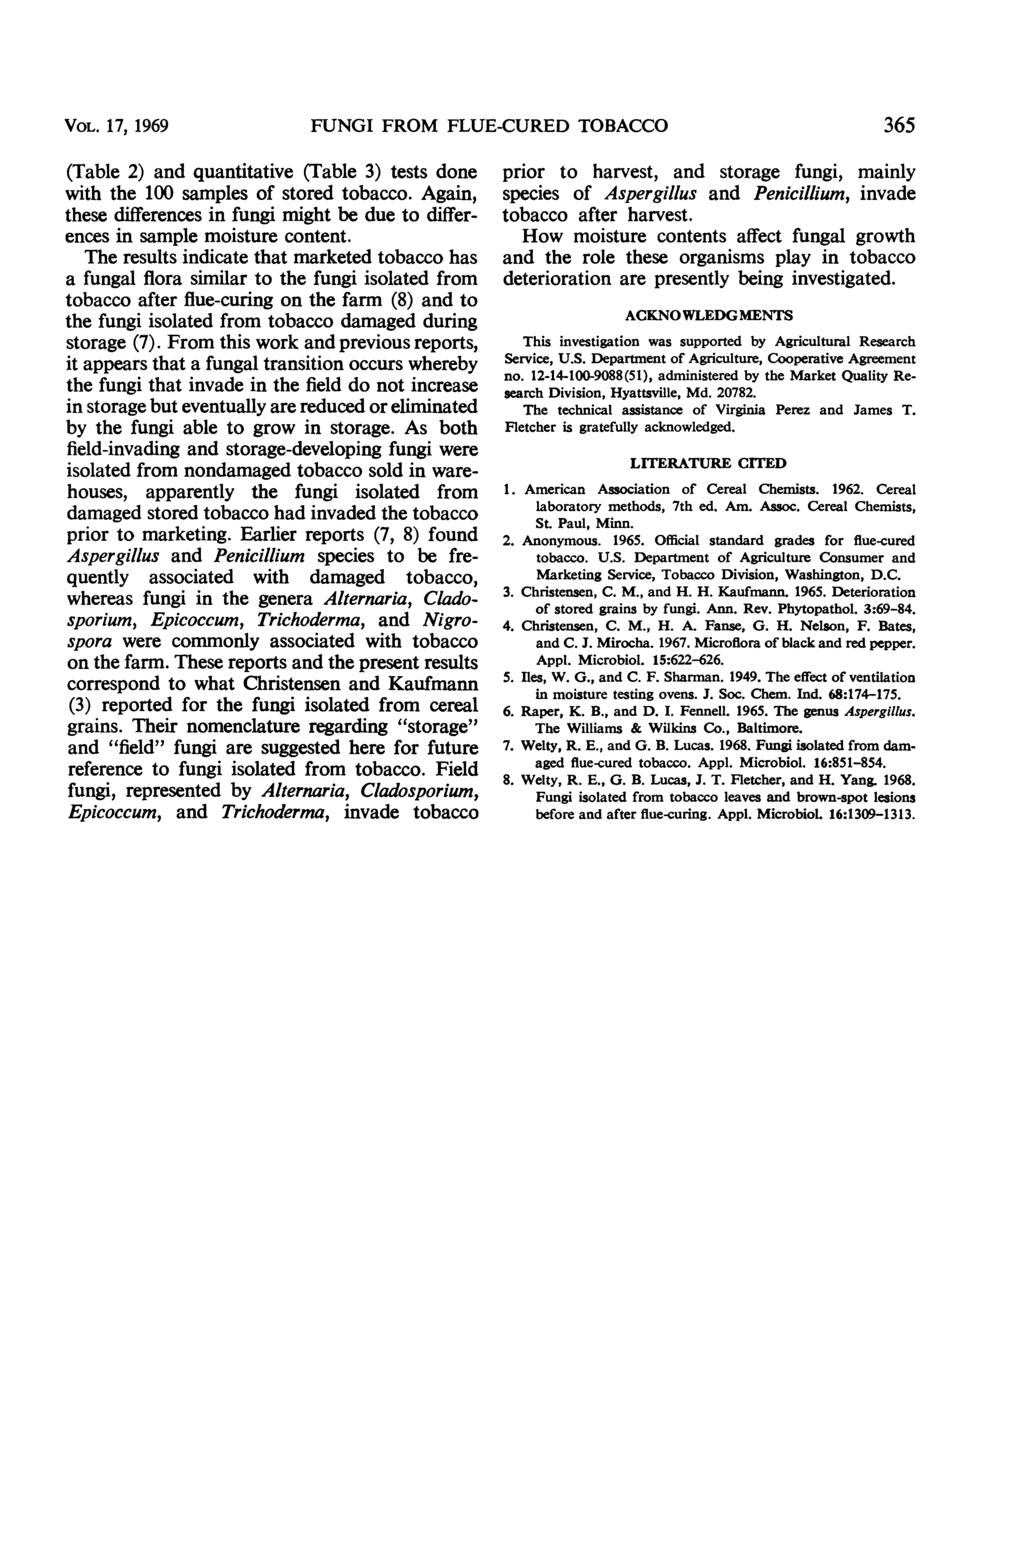 VOL. 17, 1969 FUNGI FROM FLUE-CURED TOBACCO 365 (Table 2) and quantitative (Table 3) tests done with the 100 samples of stored tobacco.